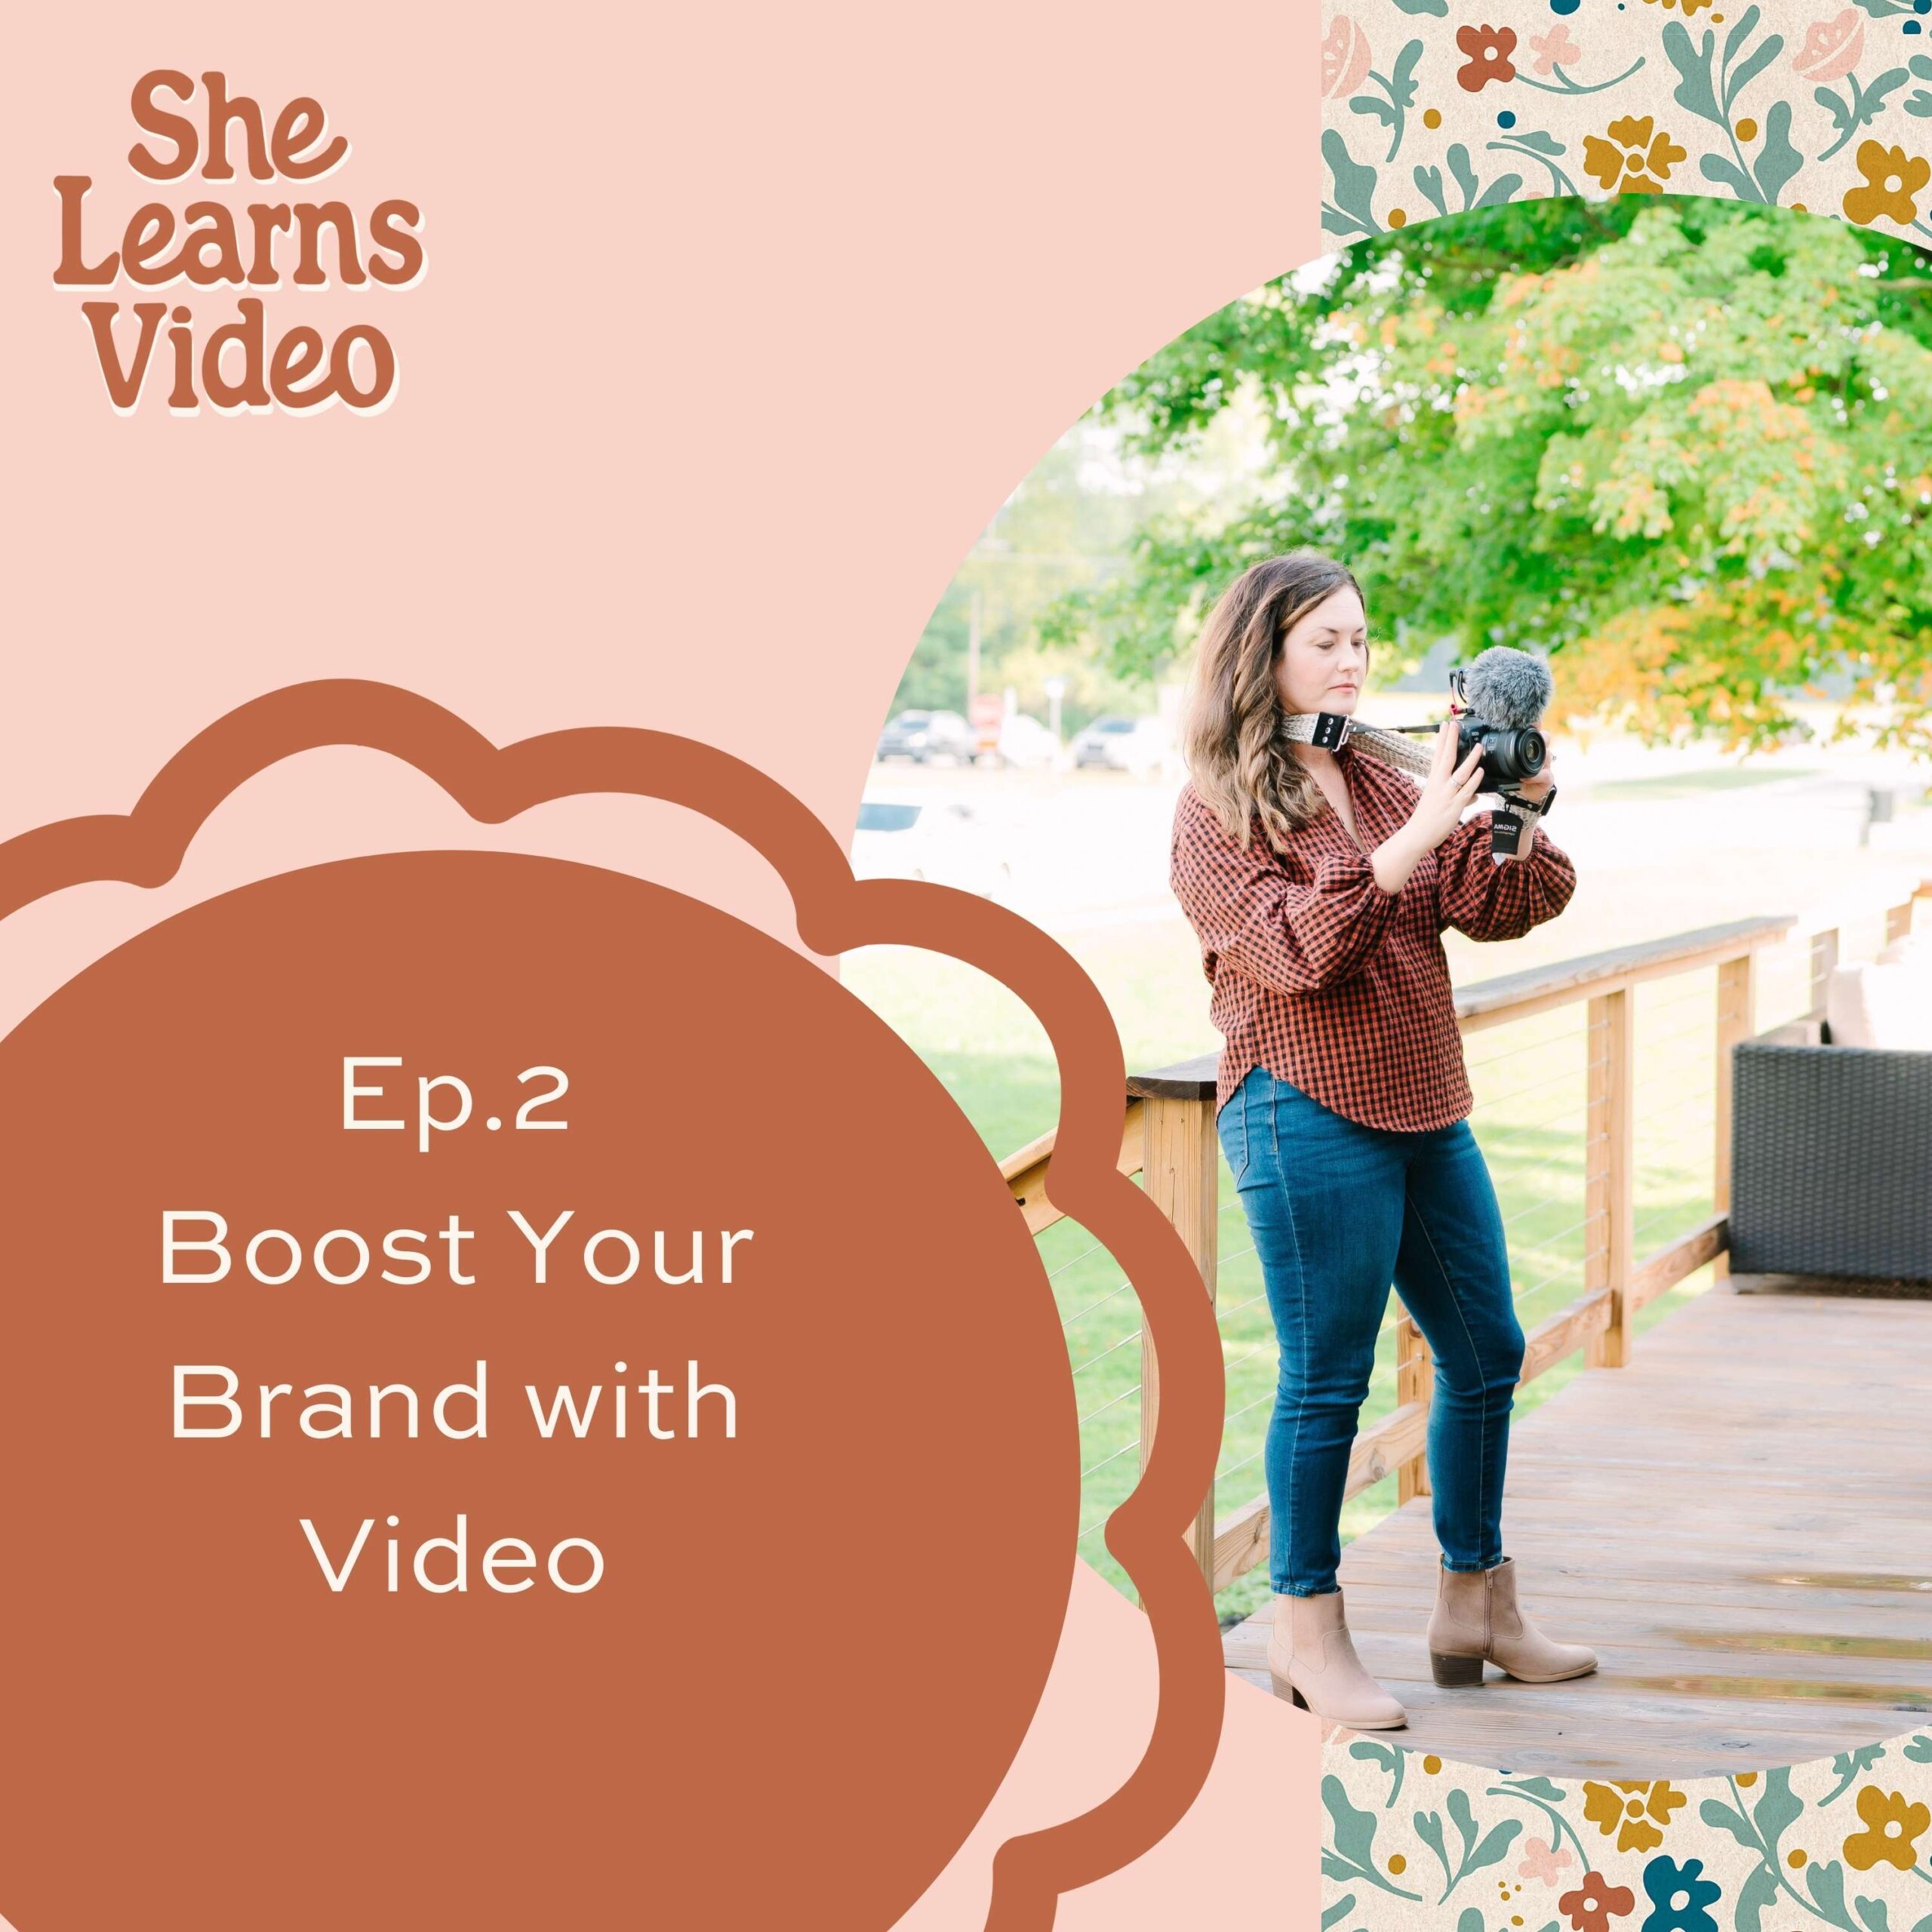 Boost Your Brand with Video